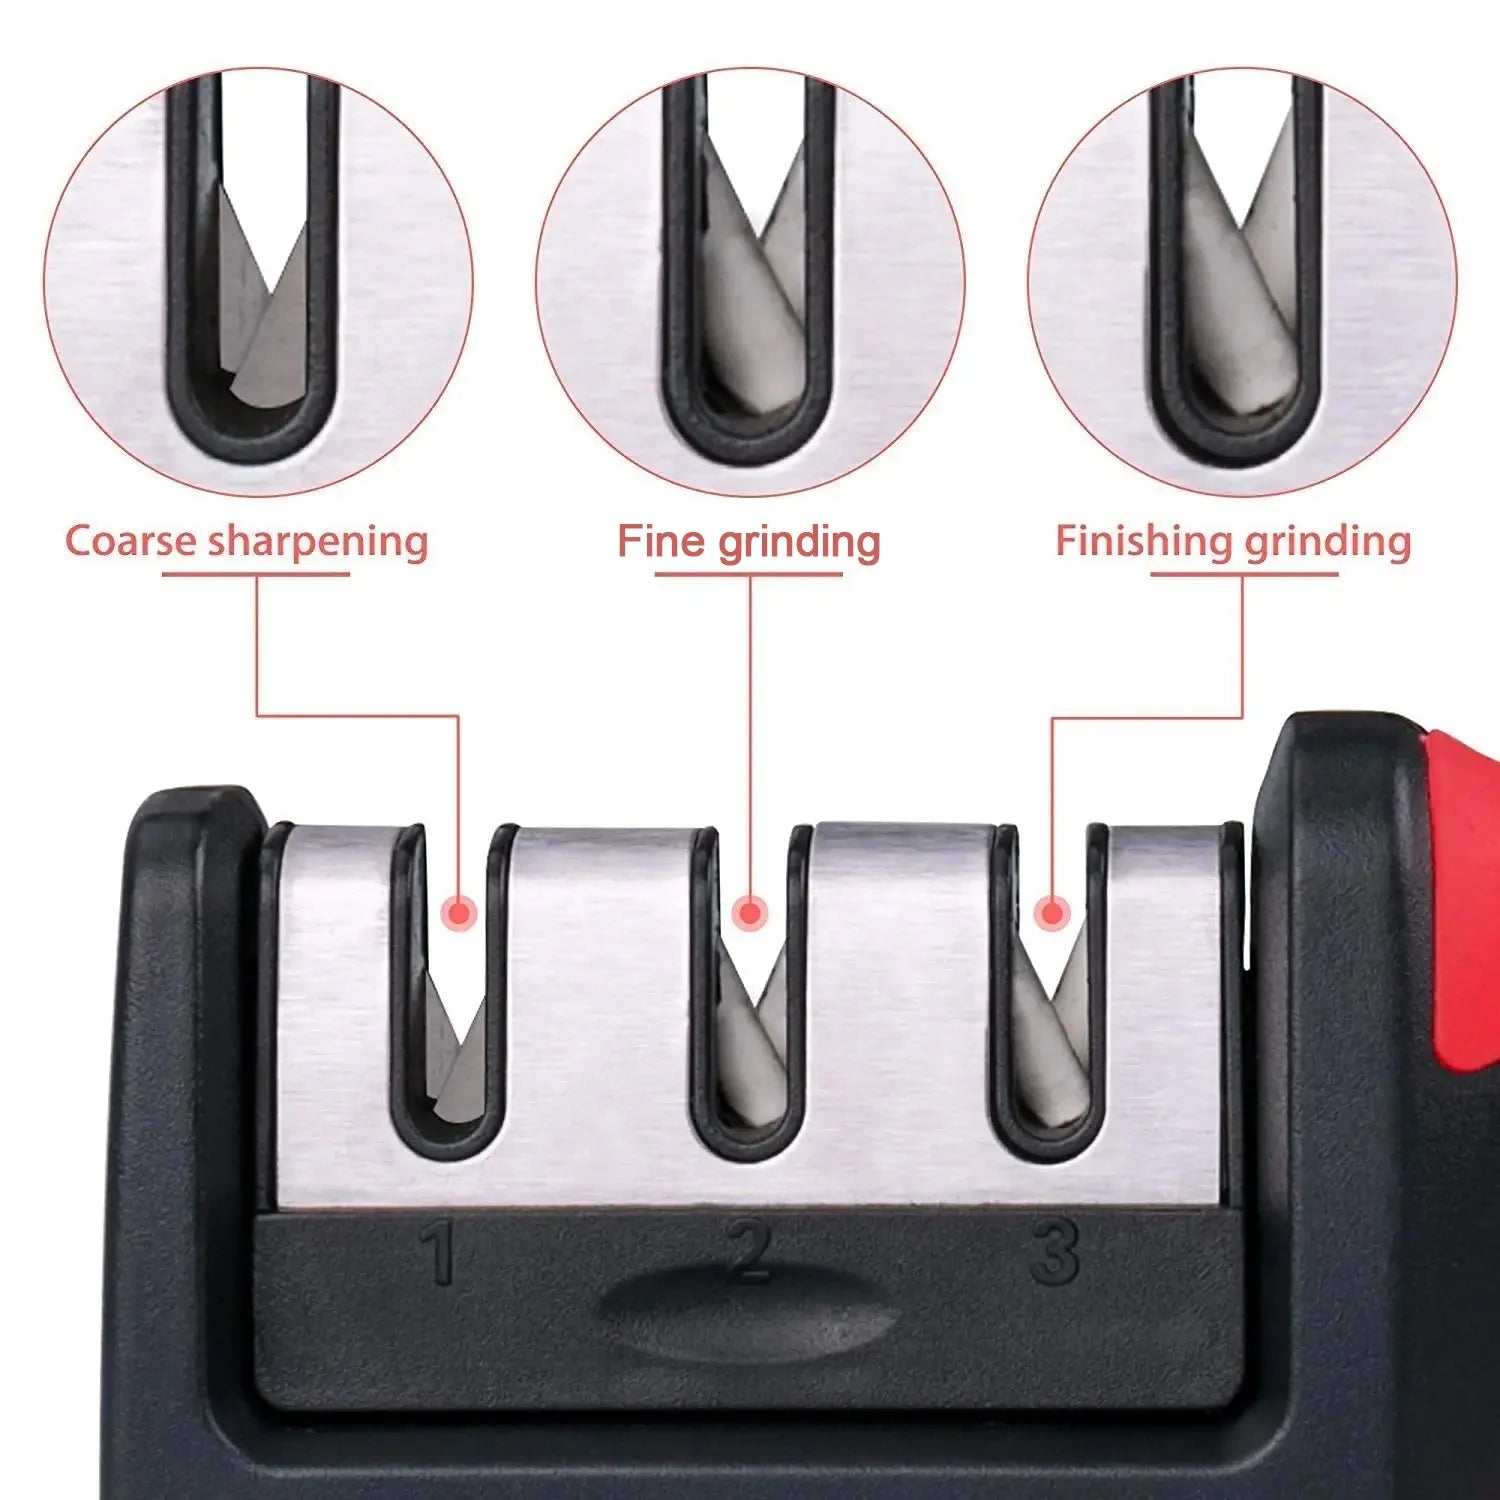 8197 Manual Knife Sharpener 3 Stage Sharpening Tool for Ceramic Knife and Steel Knives (1 Pc)